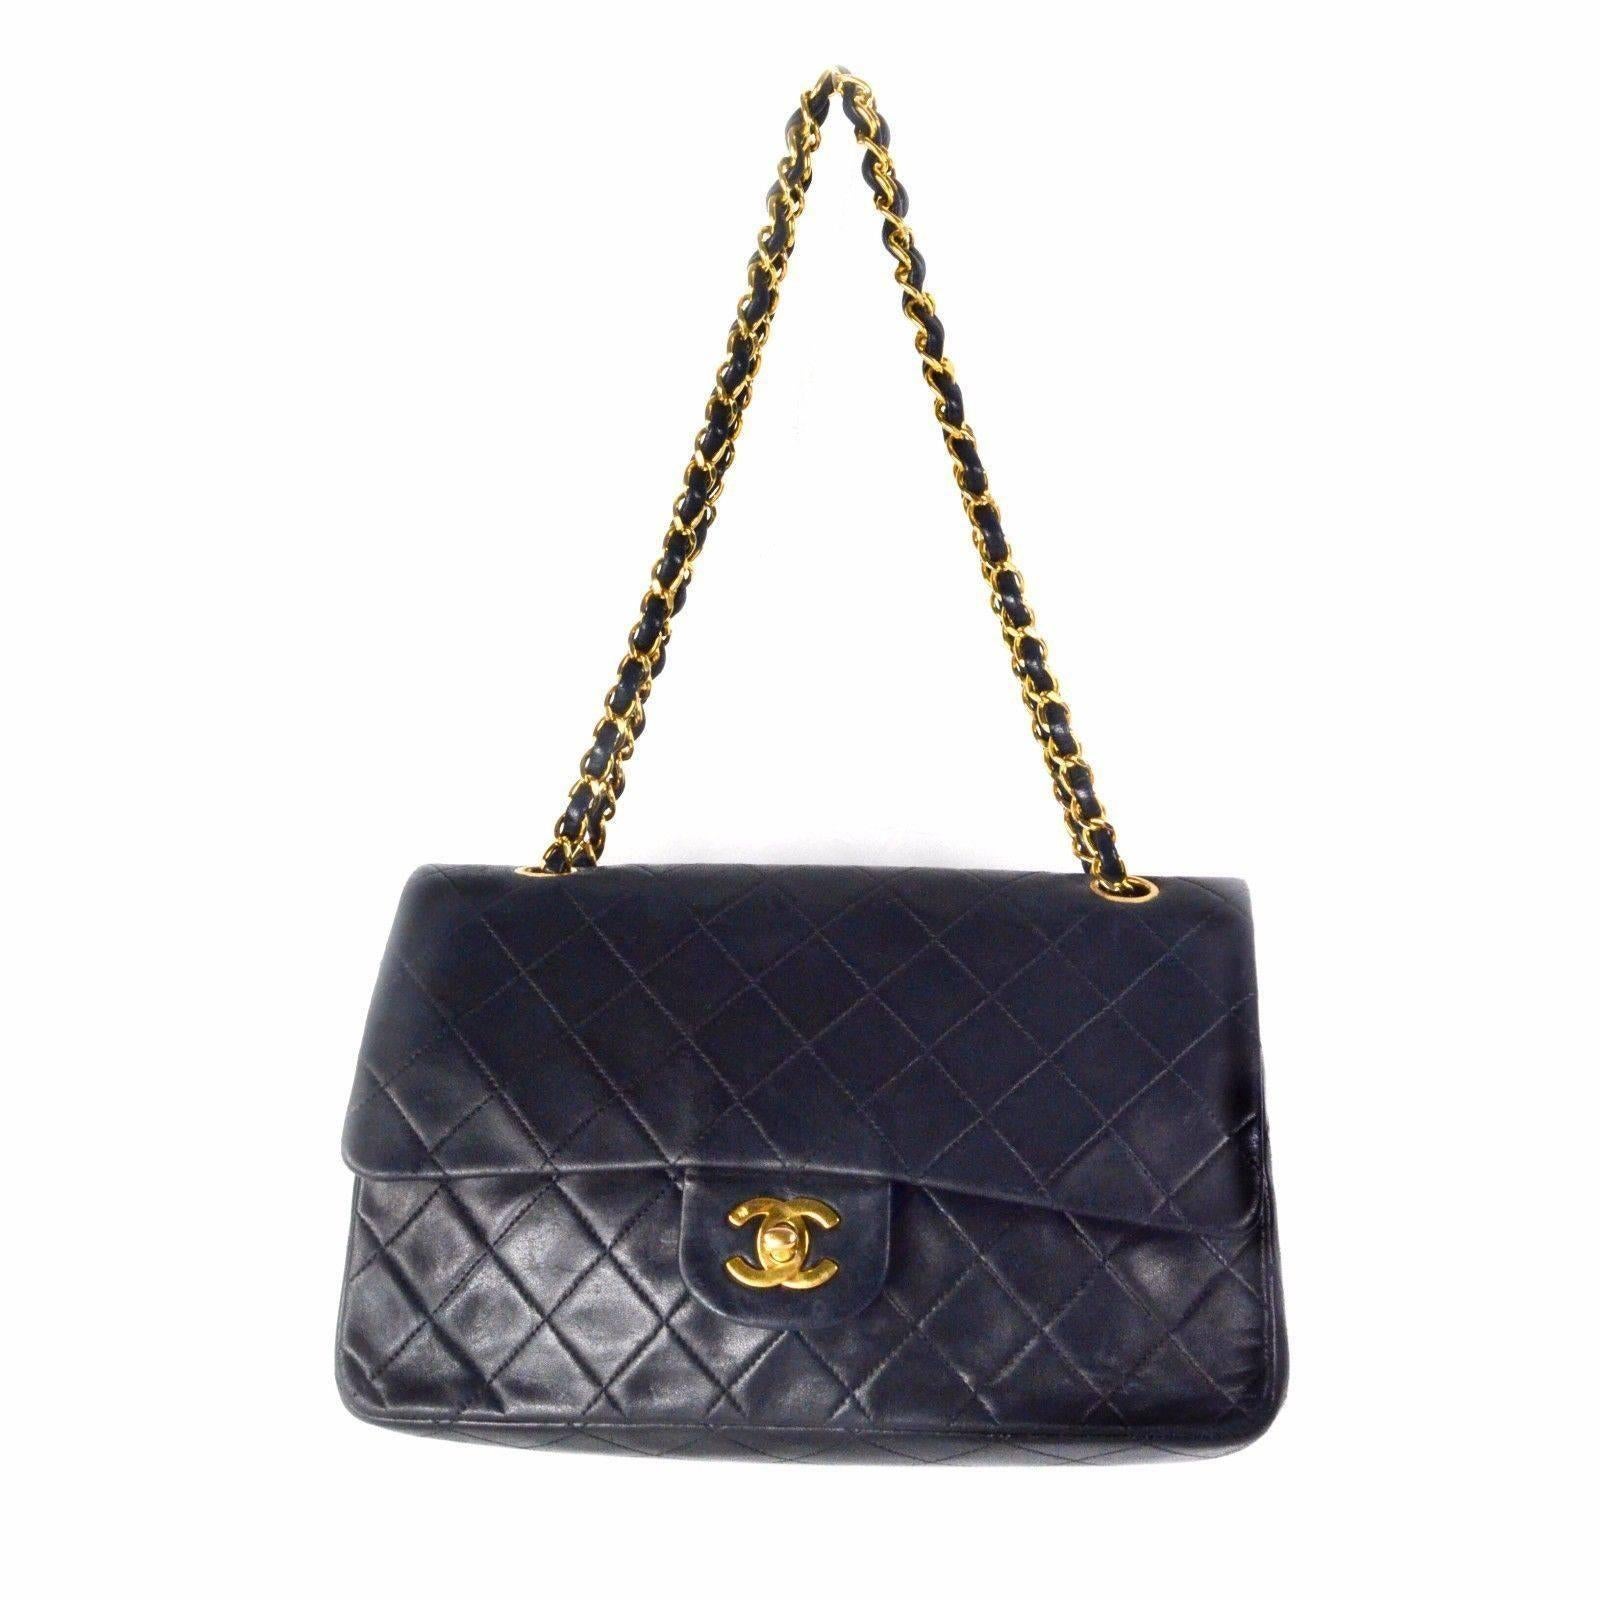 Chanel - Medium Lambskin Leather Double Flap Bag

Color: Black

Material: Lambskin Leather

------------------------------------------------------------

Details:

- can be worn single or double strap on shoudler

- gold tone hardware

- CC turnlock